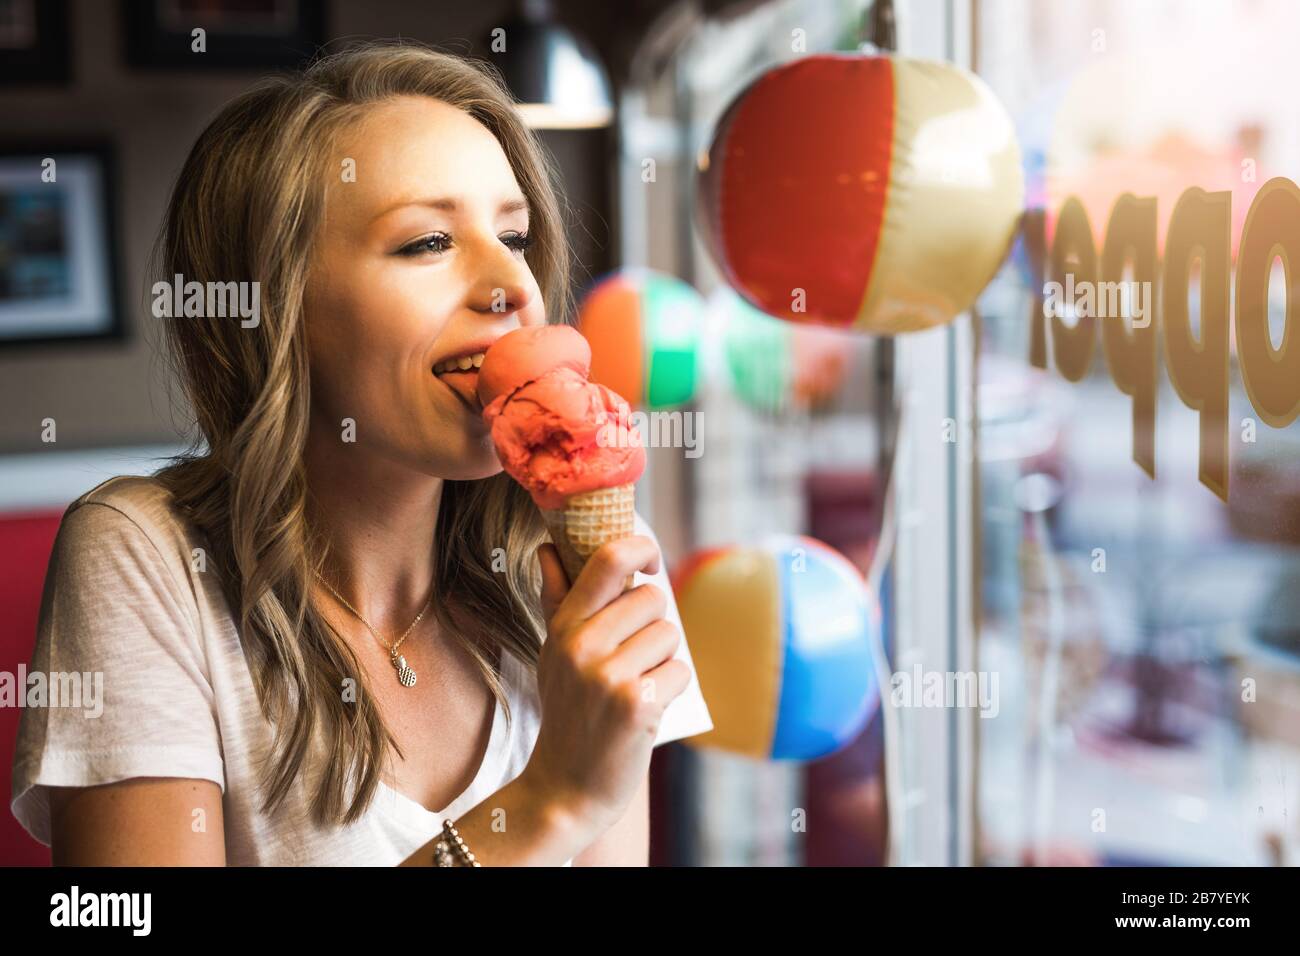 young woman licking an ice cream cone on a summer evening Stock Photo